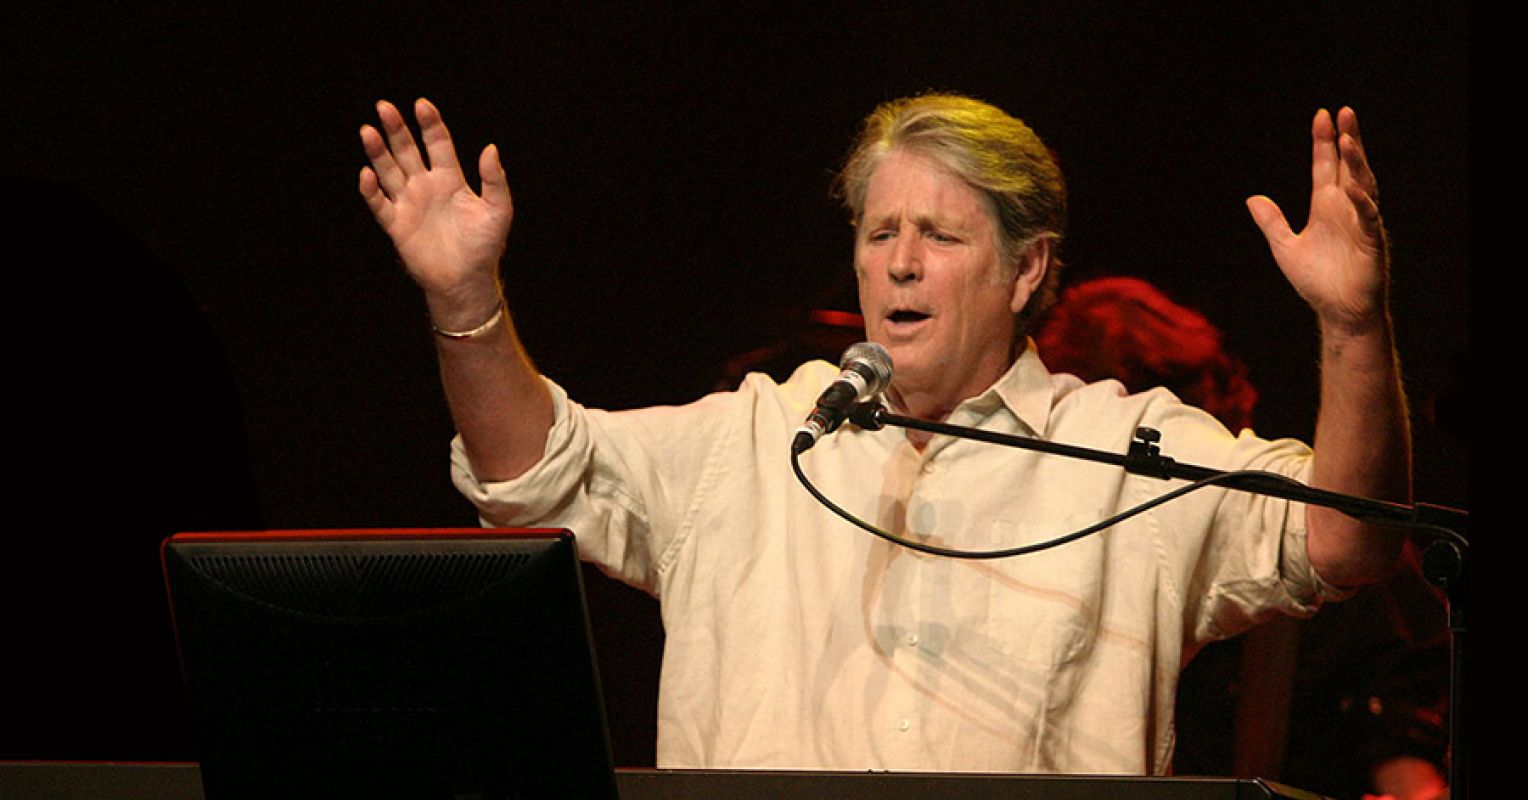 100 – This most sacred post, I dedicate to thee, Brian Wilson. You